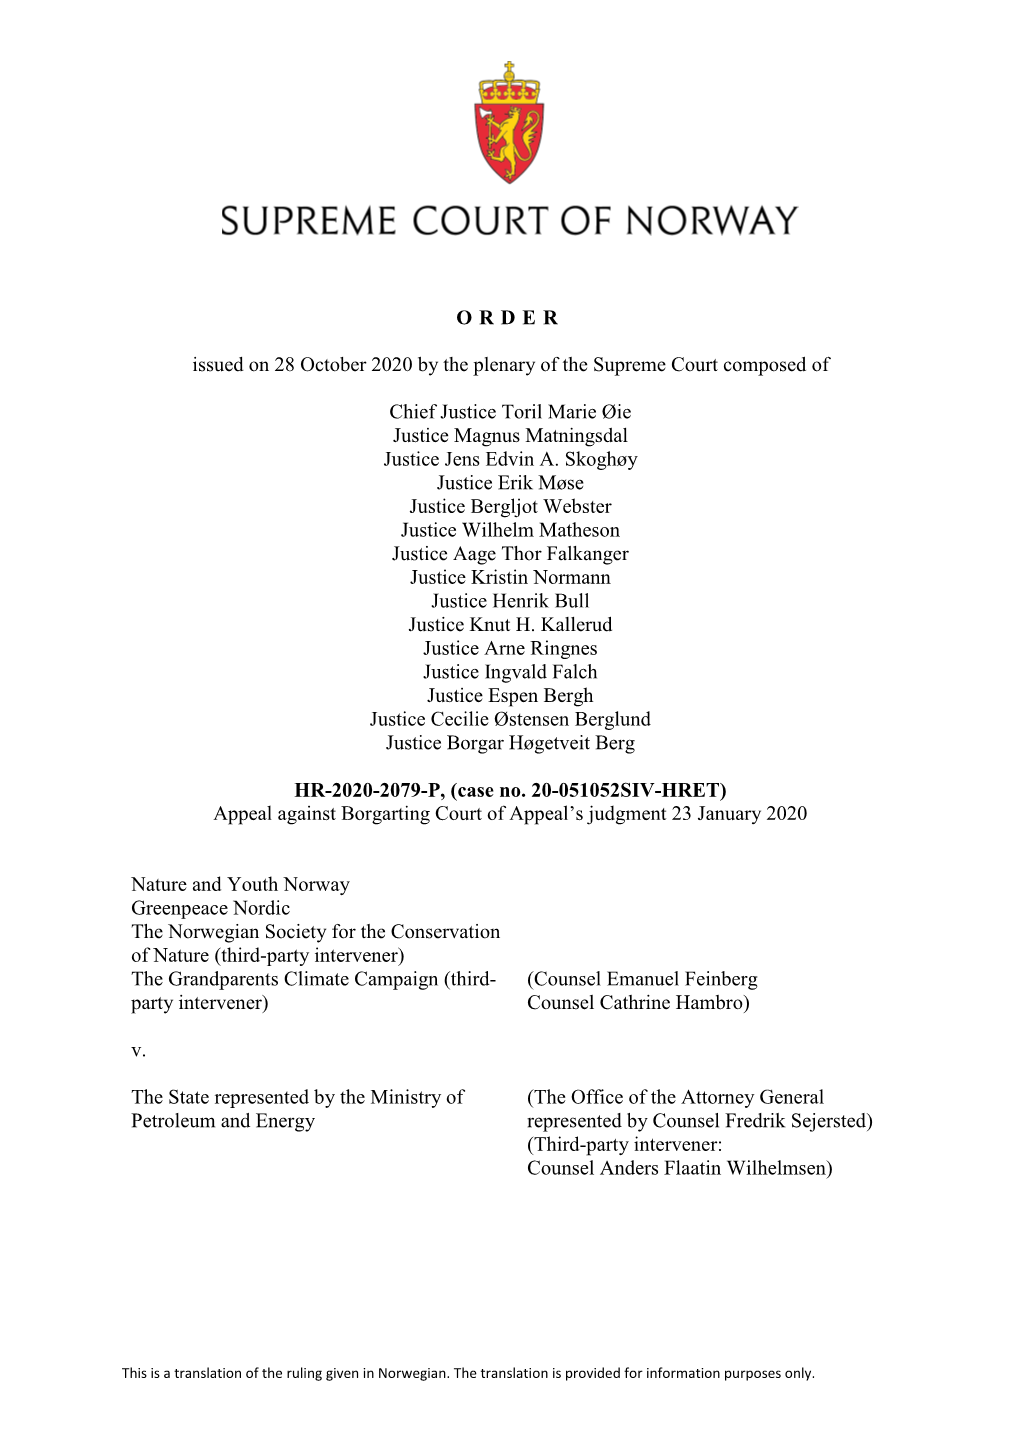 ORDER Issued on 28 October 2020 by the Plenary of the Supreme